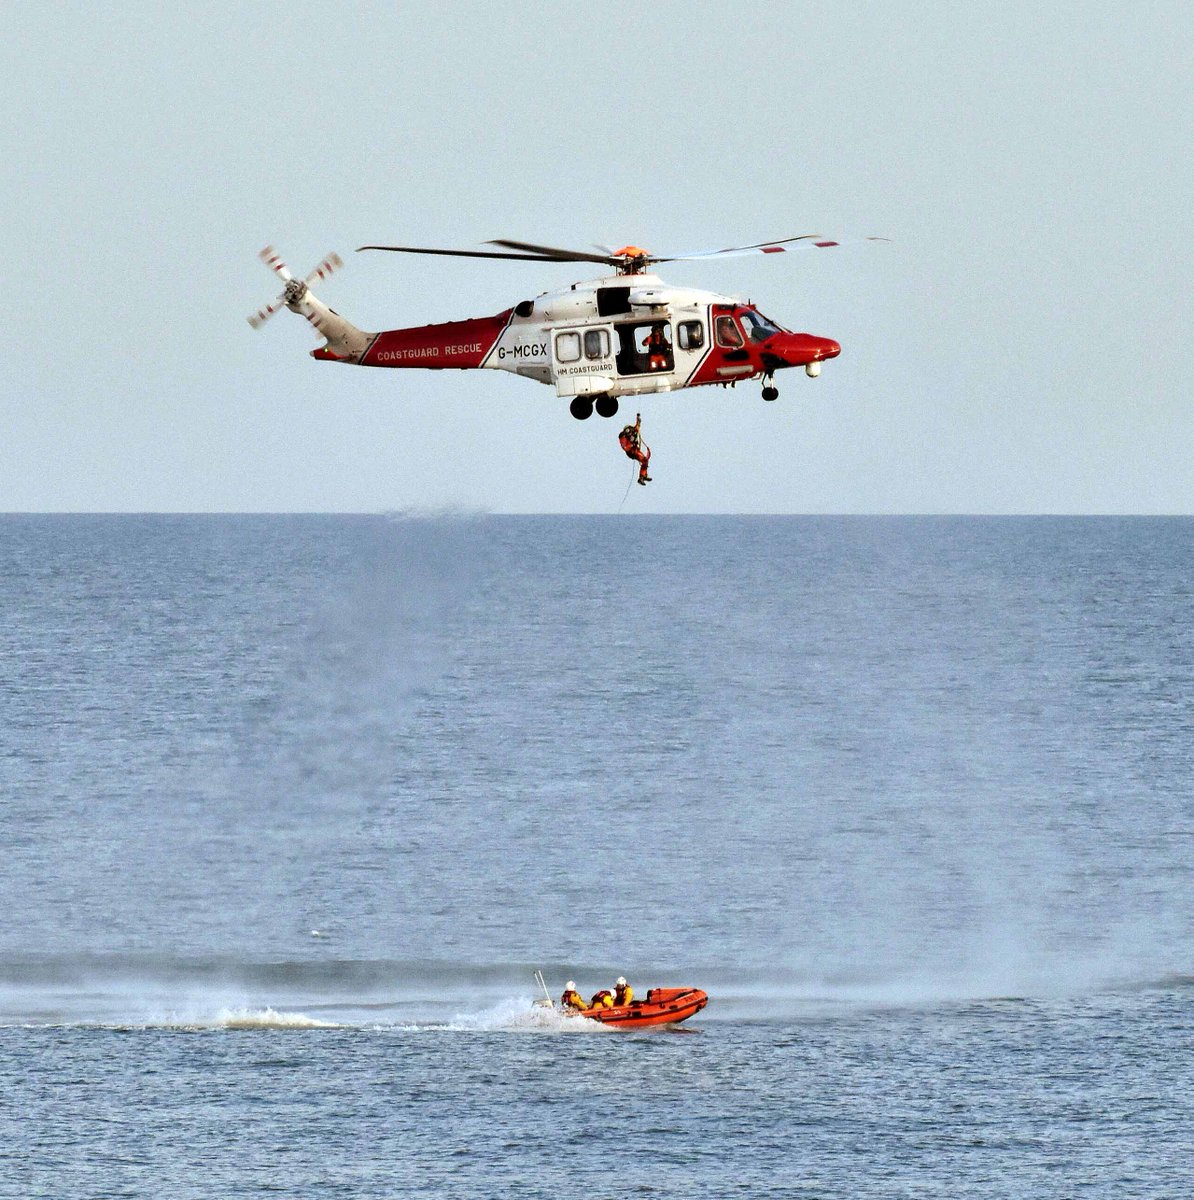 Photographs of Exmouth RNLI volunteer crew on exercise with an H.M. Coastguard Helicopter recently. Credit : Dave Cooper @RNLI @RNLI @RNLI #rnli #lifeboat #lifeboats #exmouth #rescue